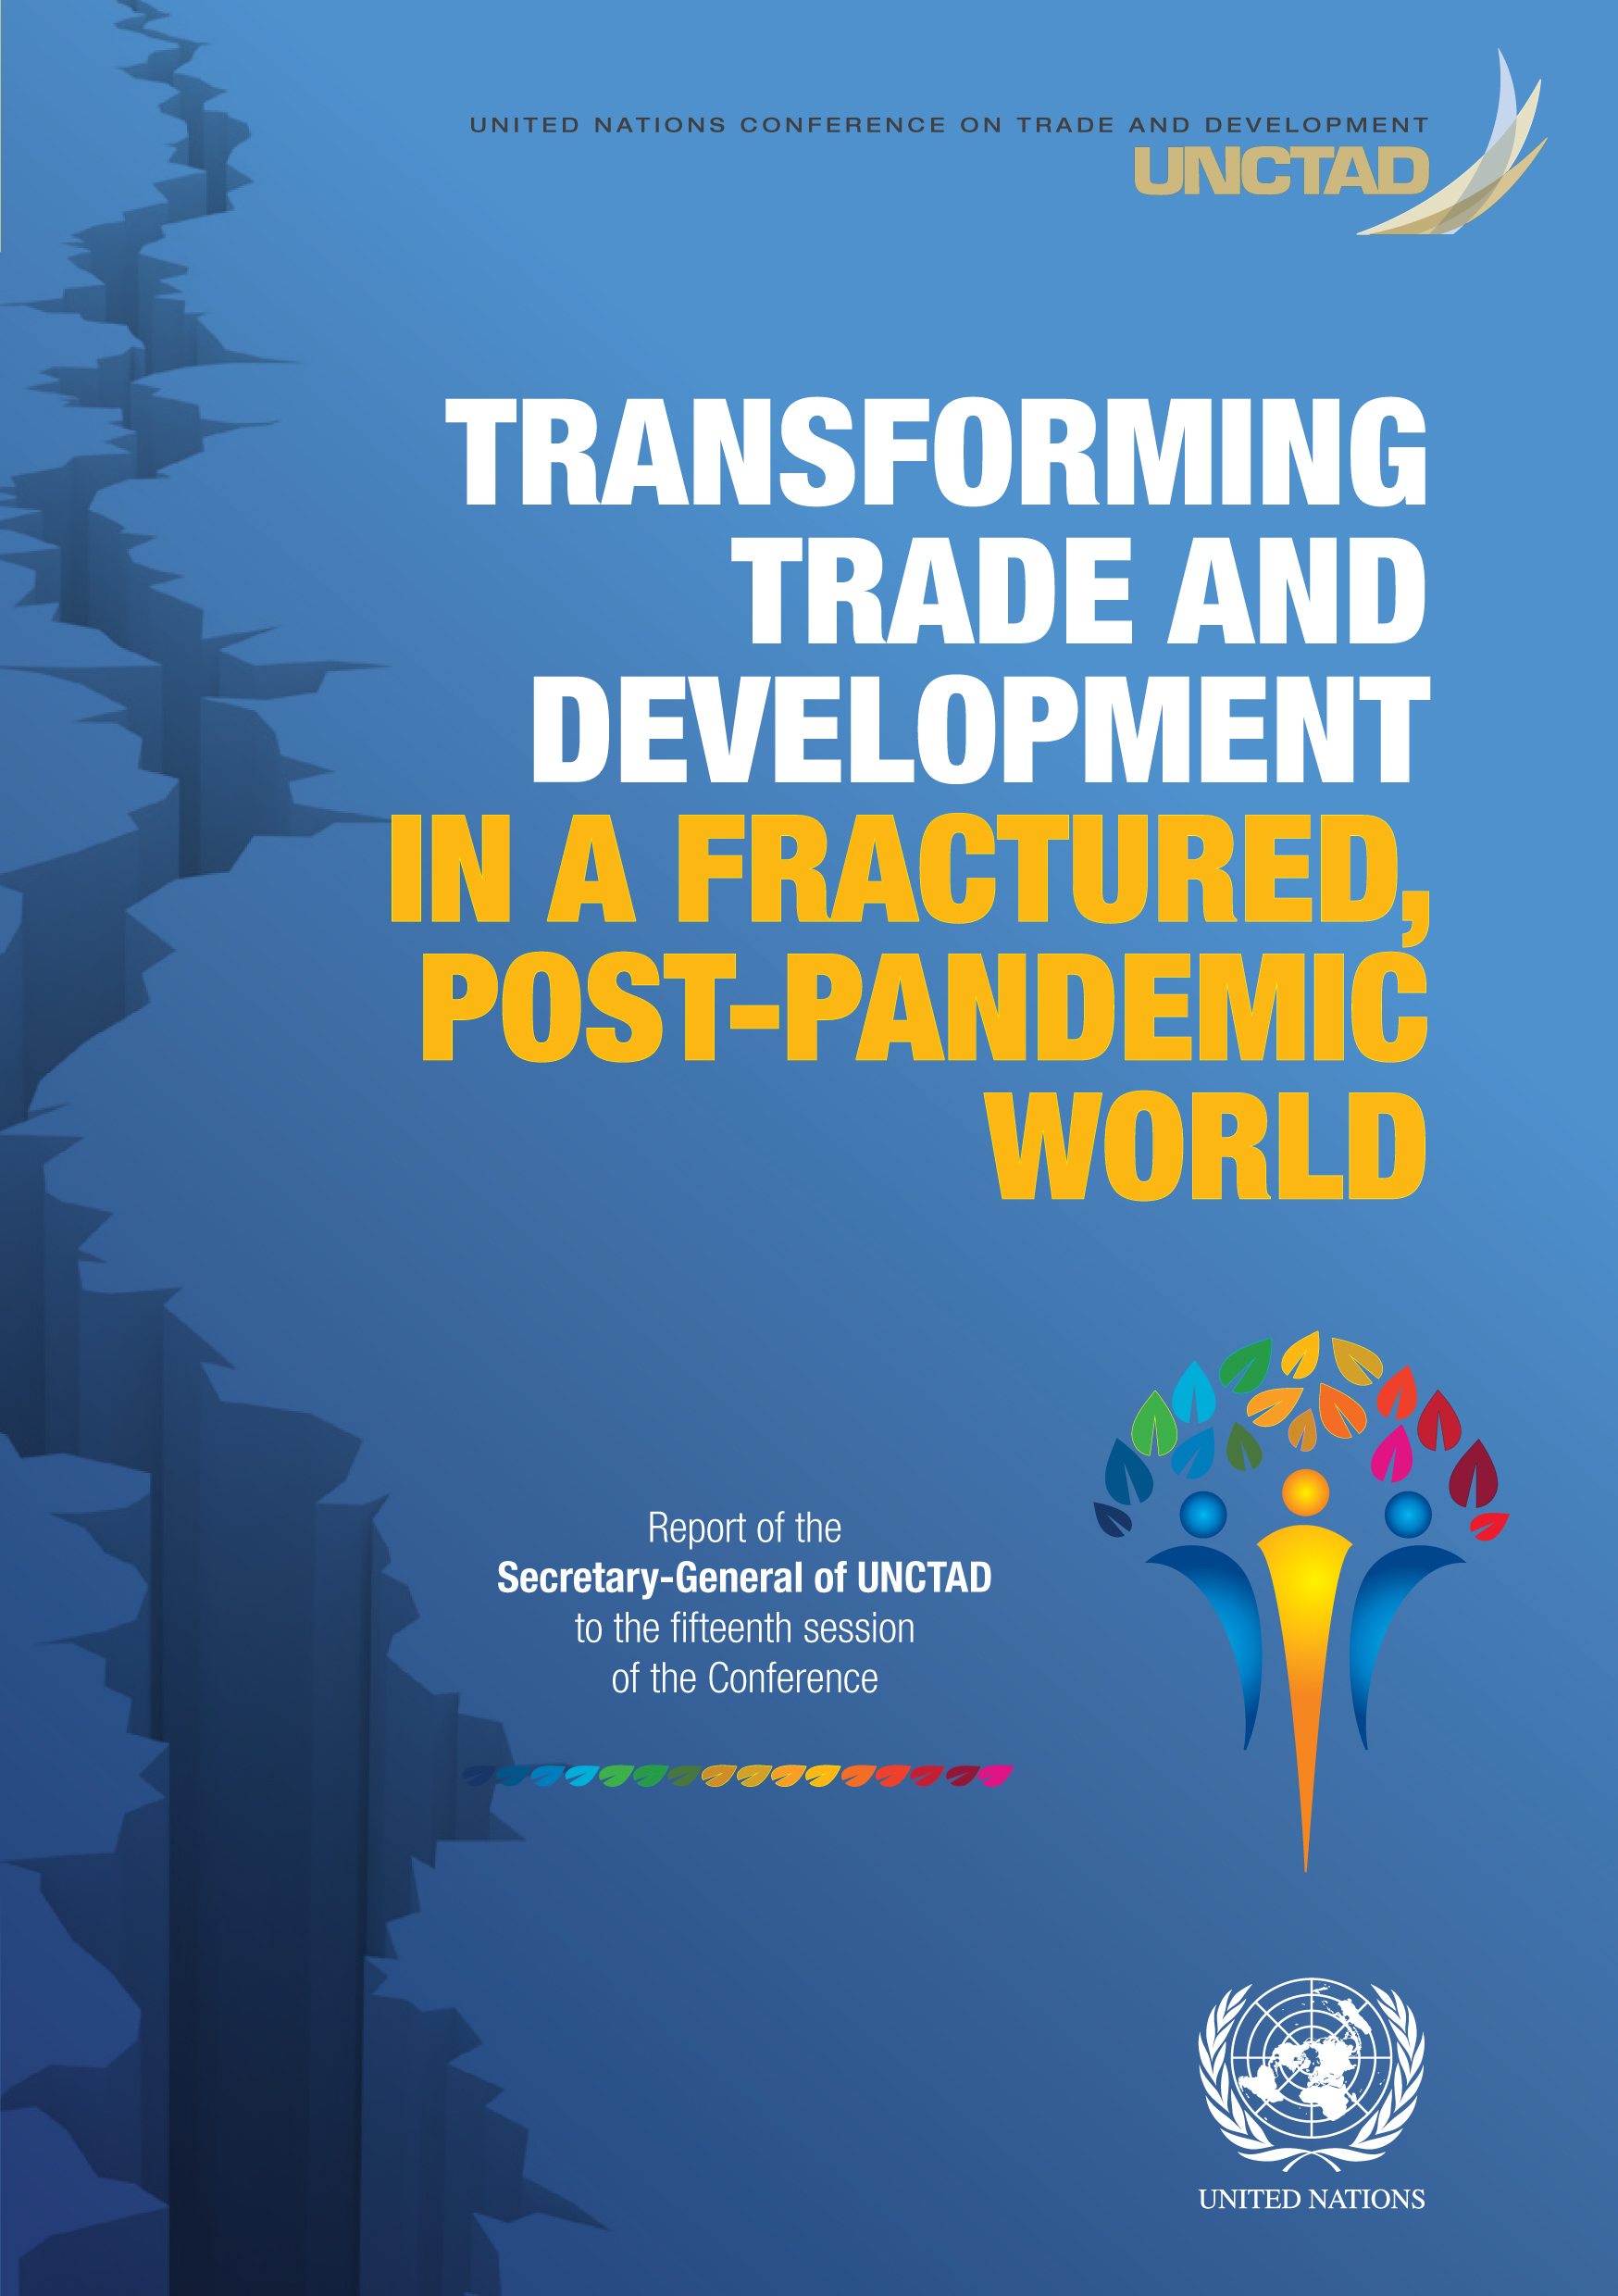 image of Transforming Trade and Development in a Fractured, Post-Pandemic World